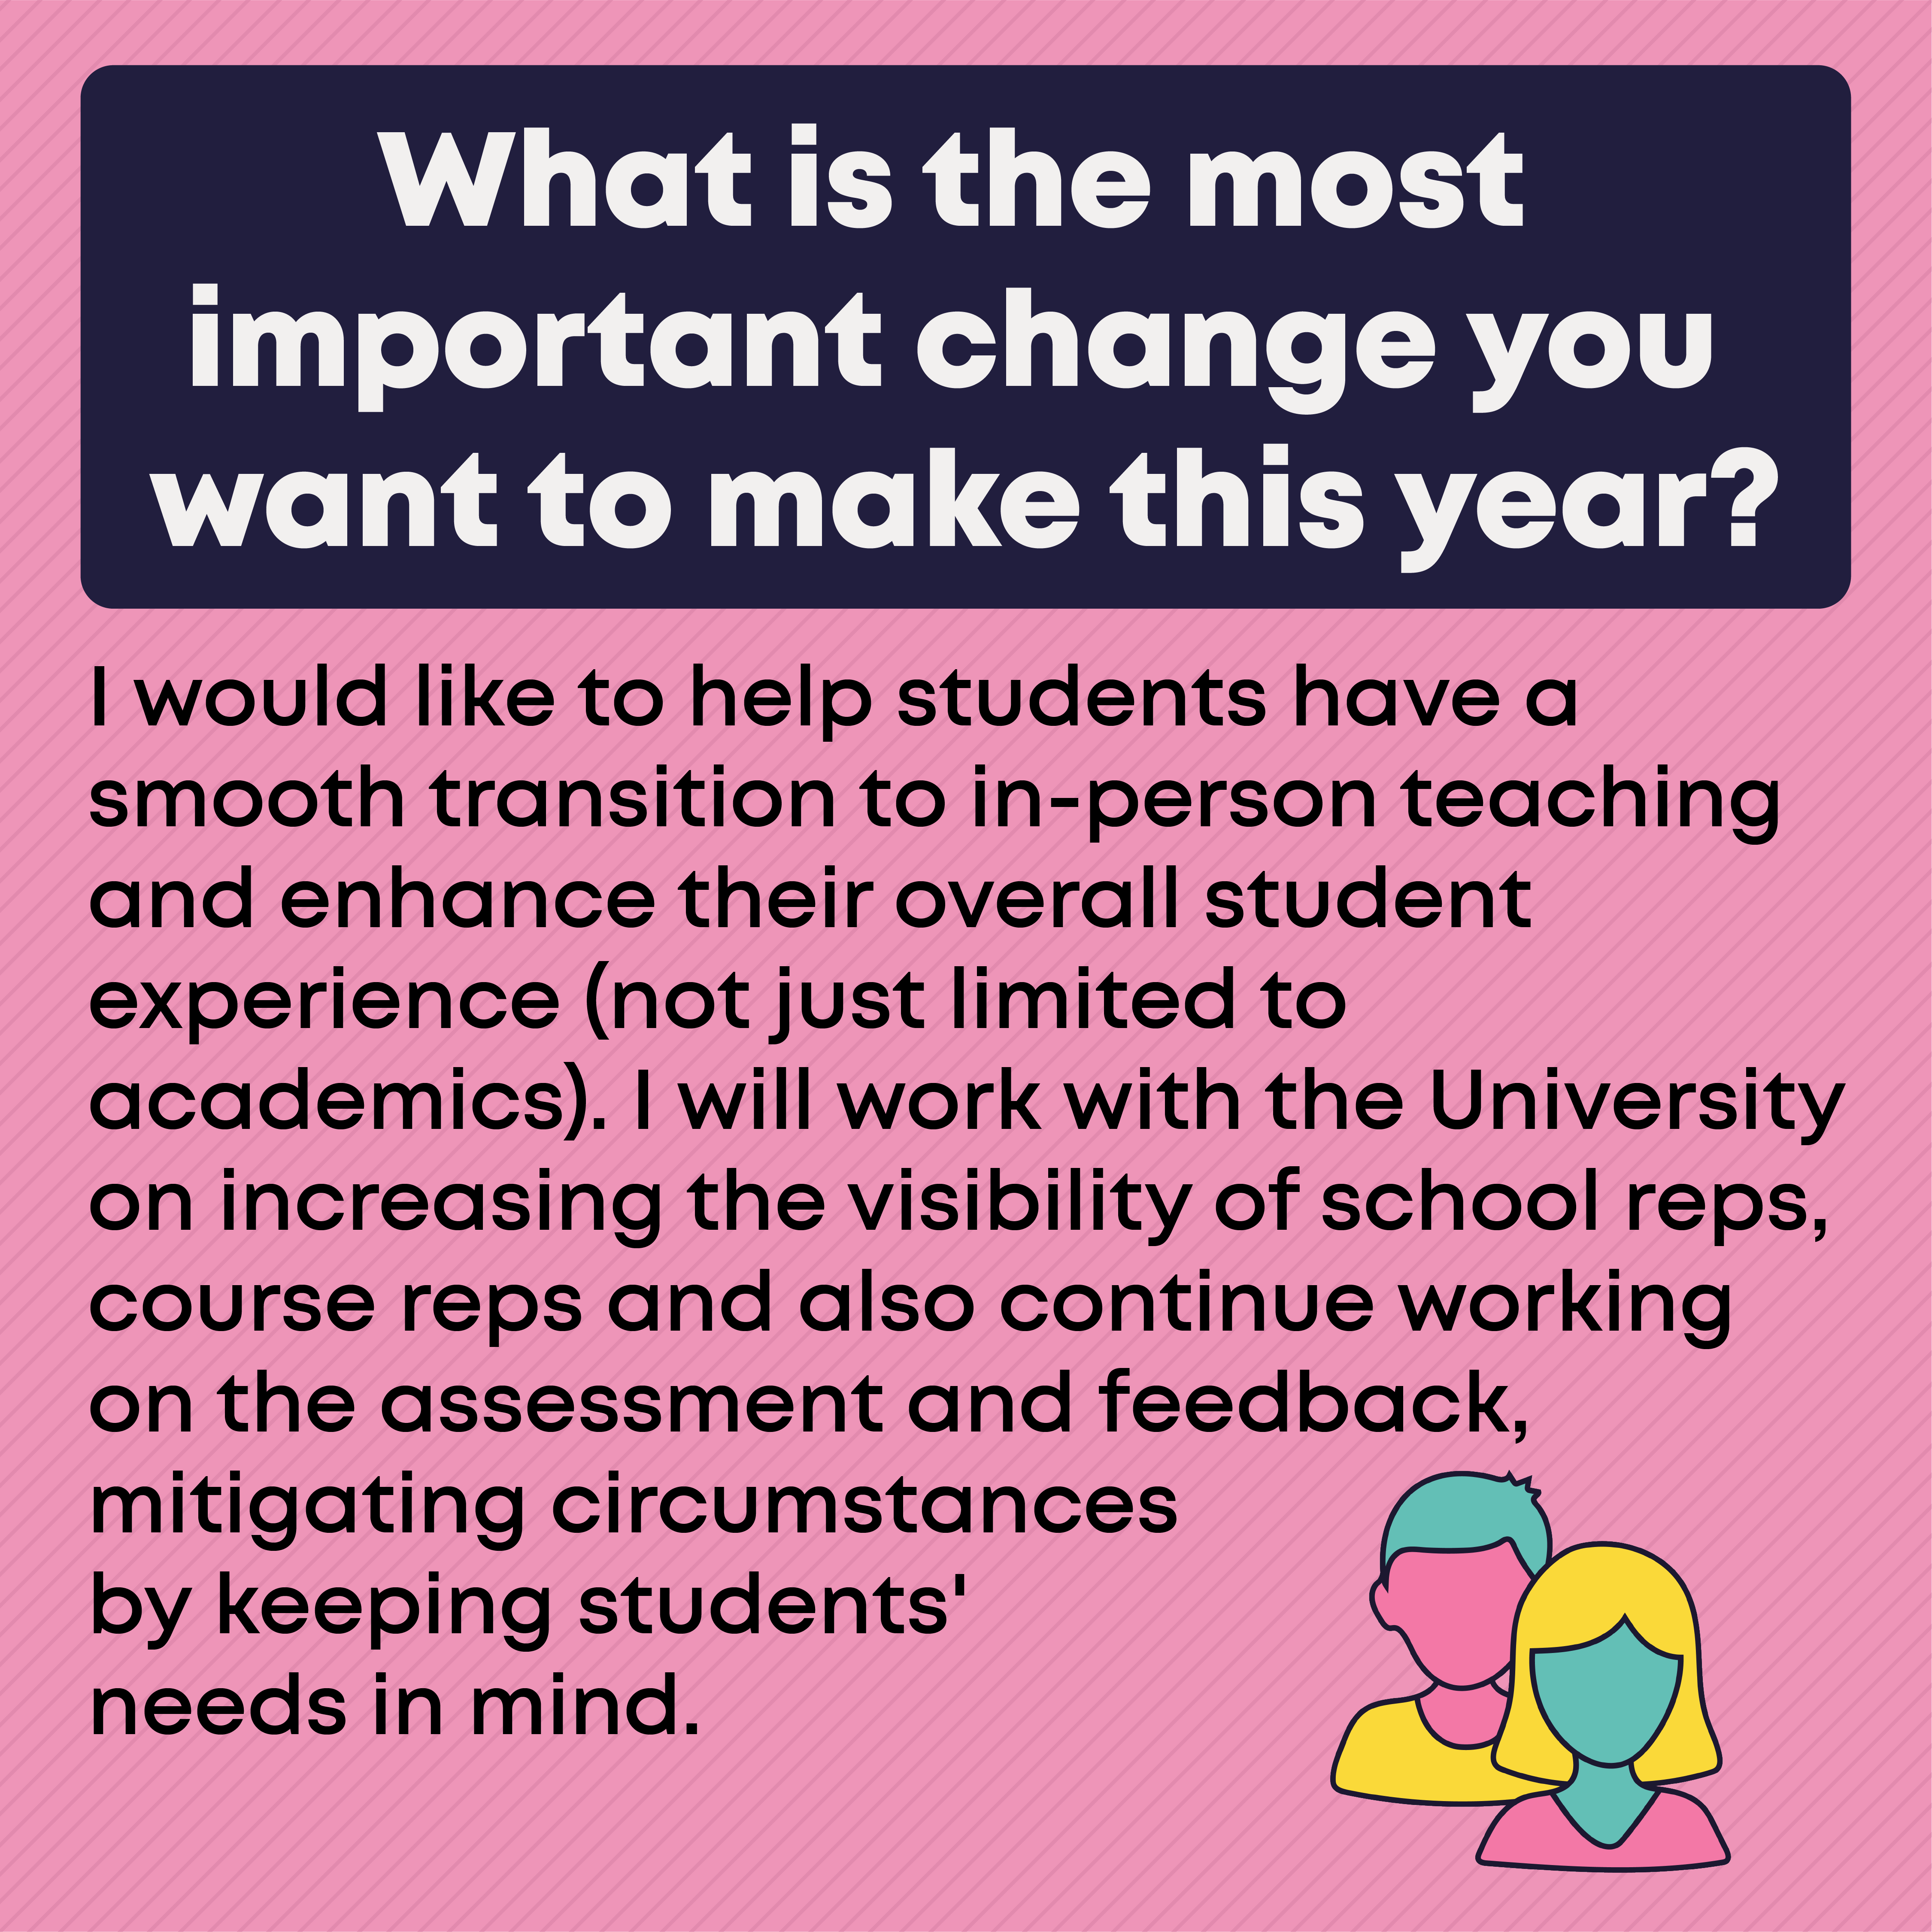 What is the most important change you want to make this year?  I would like to help students have a smooth transition to in-person teaching and enhance their overall student experience (not just limited to academics). I will work with the University on increasing the visibility of school reps, course reps and also continue working on the assessment and feedback, mitigating circumstances by keeping students' needs in mind.